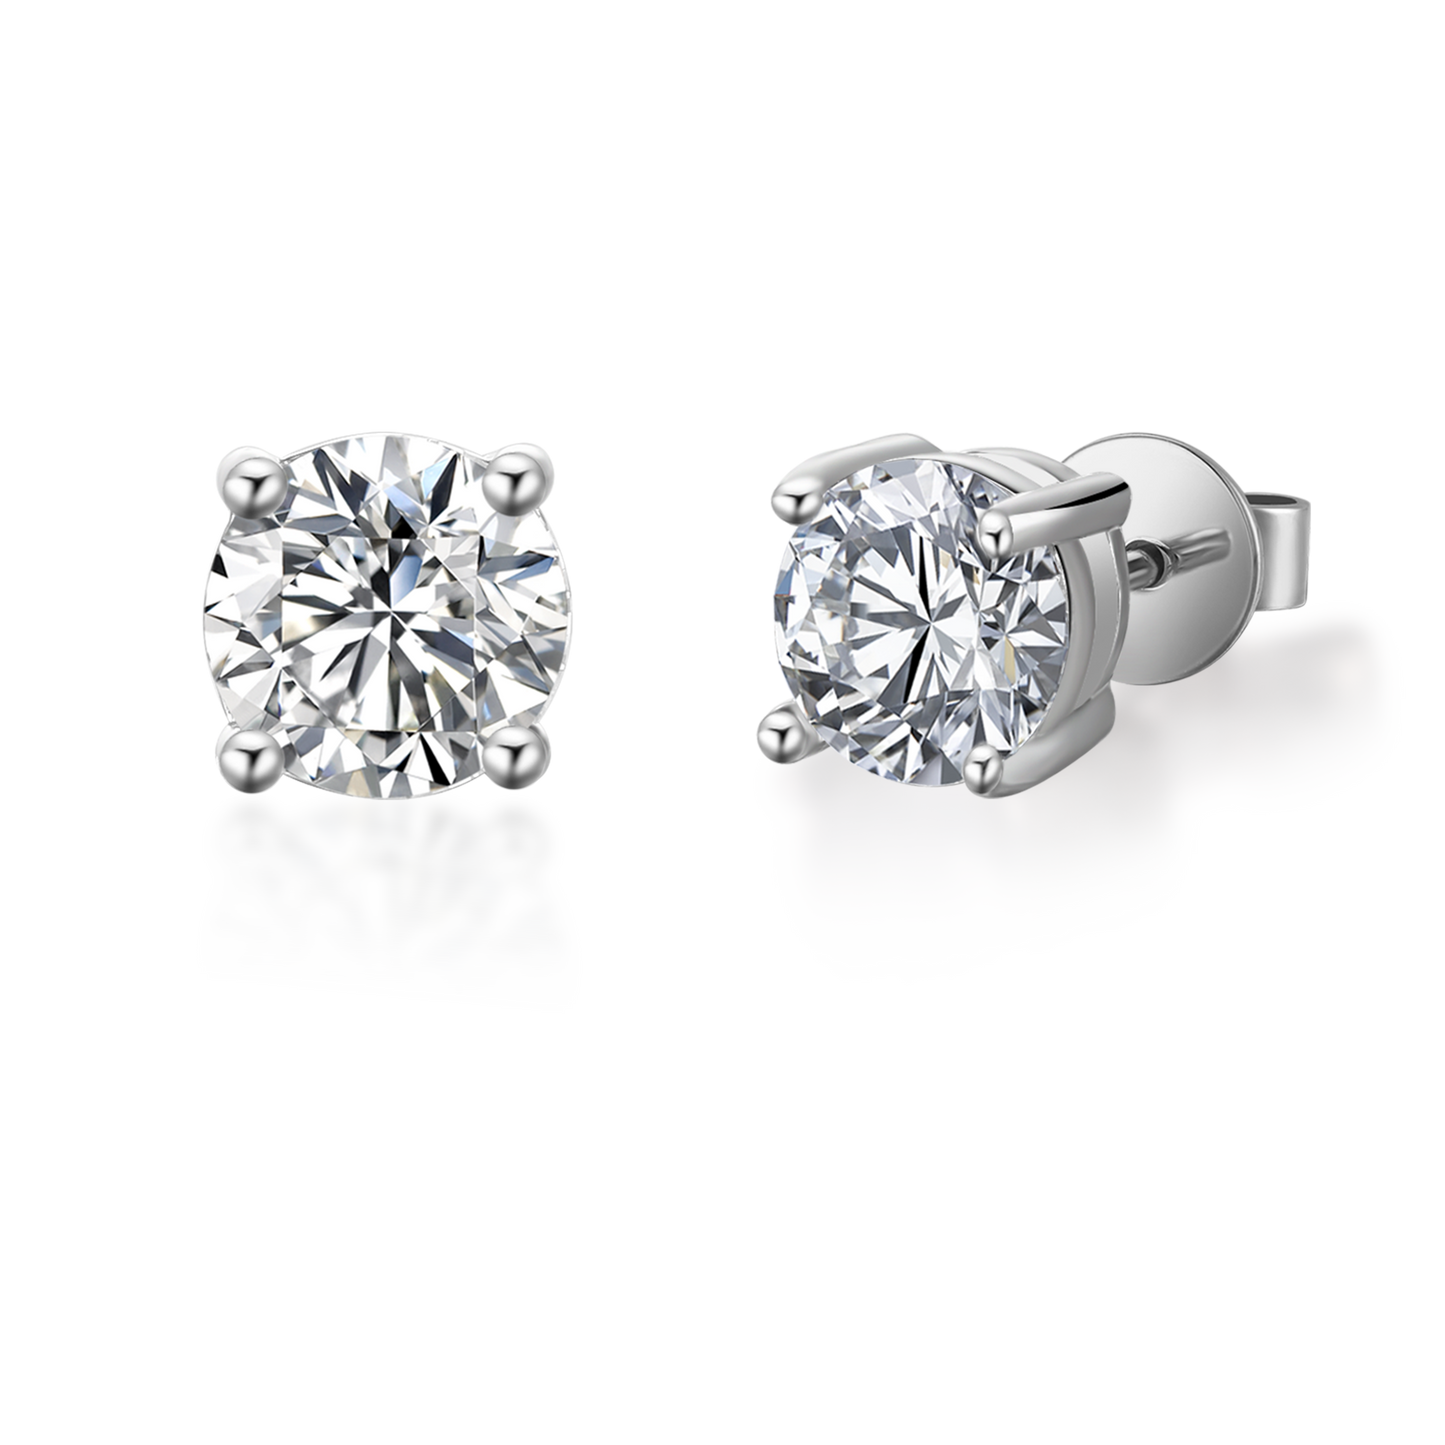 Classic Solitaire 4 Claw Moissanite Stud Earrings Set in Sterling Silver